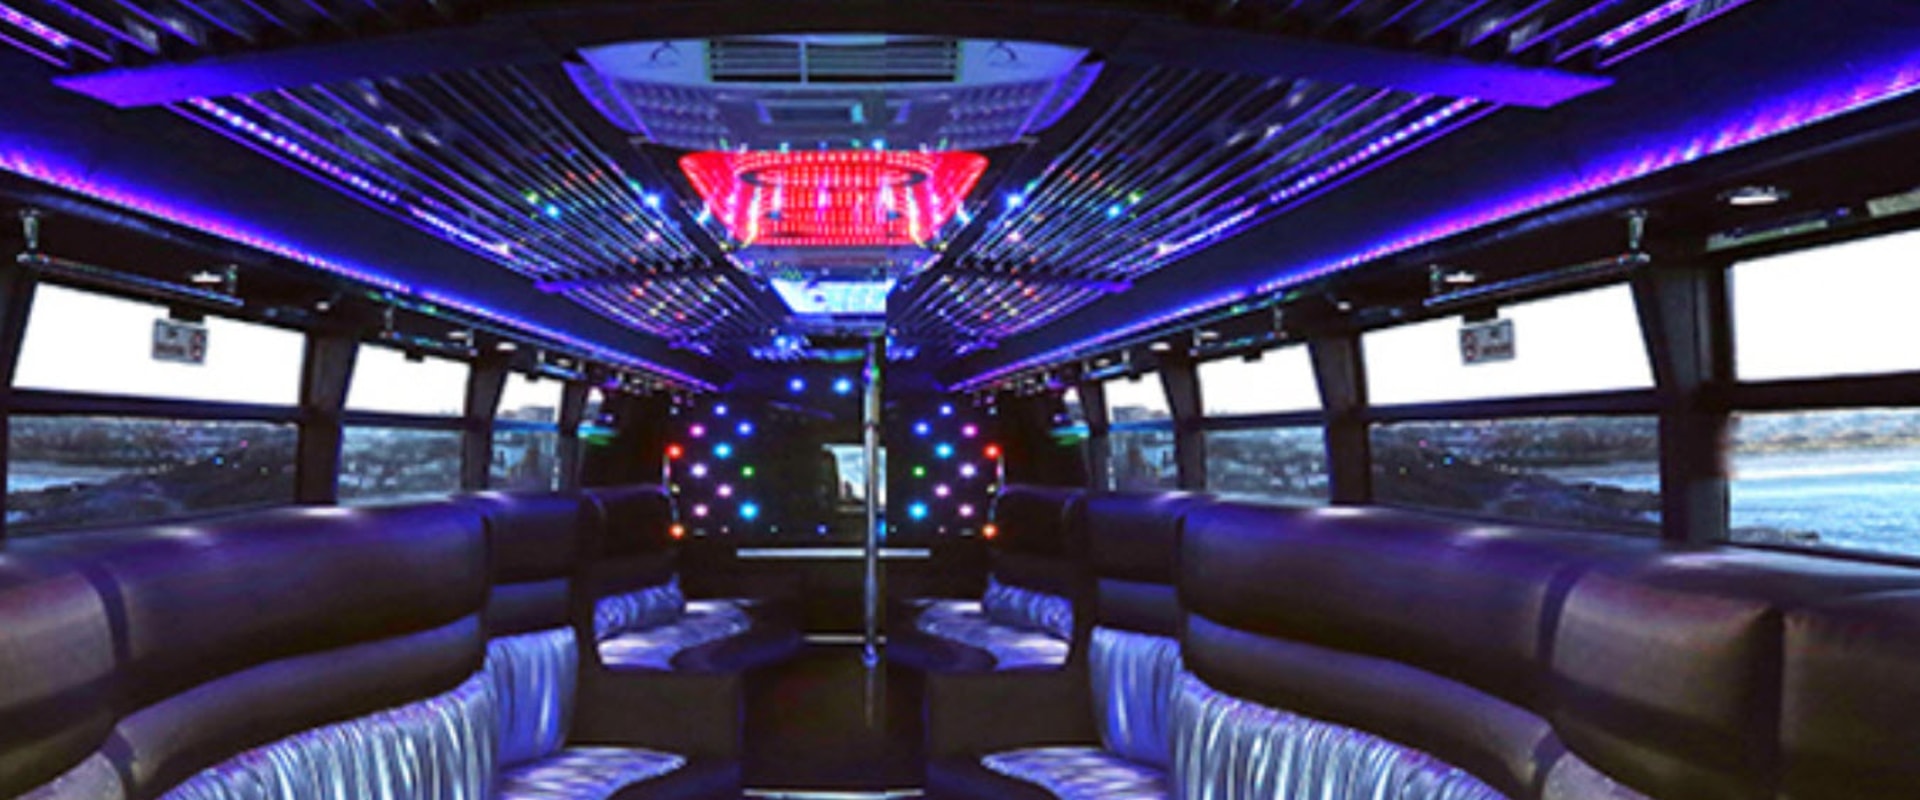 Party bus and limo hire?